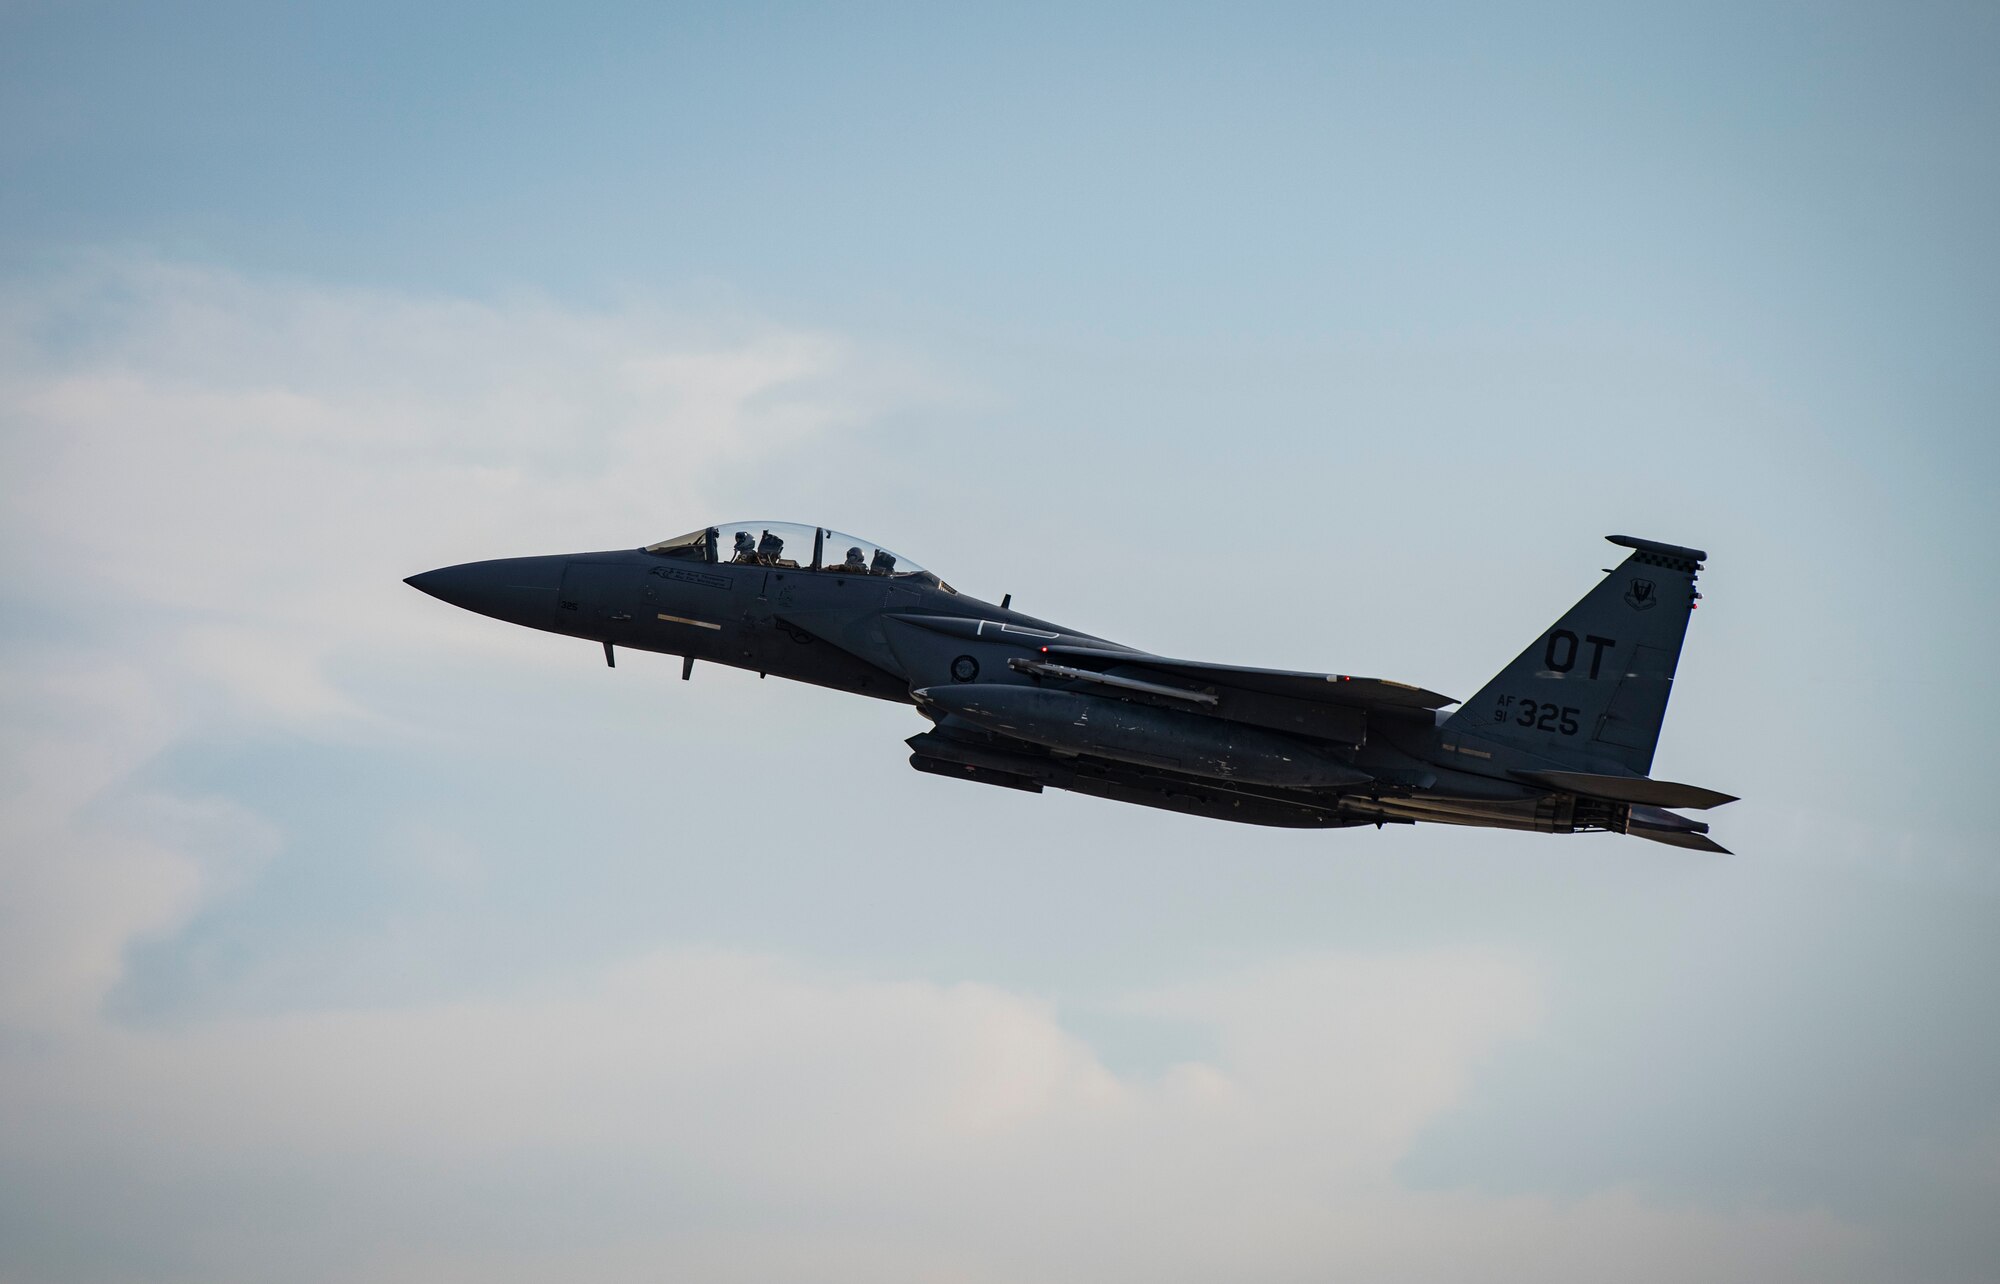 An F-15E Strike Eagle fighter jet assigned to the 422nd Test and Evaluation Squadron, Nellis Air Force Base, Nev., takes off during Combat Archer 19-12 on Tyndall AFB, Fla., Sept. 24, 2019. The F-15E Strike Eagle is a dual-role fighter designed to perform air-to-air and air-to-ground missions. (U.S. Air Force photo by Airman 1st Class Bailee A. Darbasie)